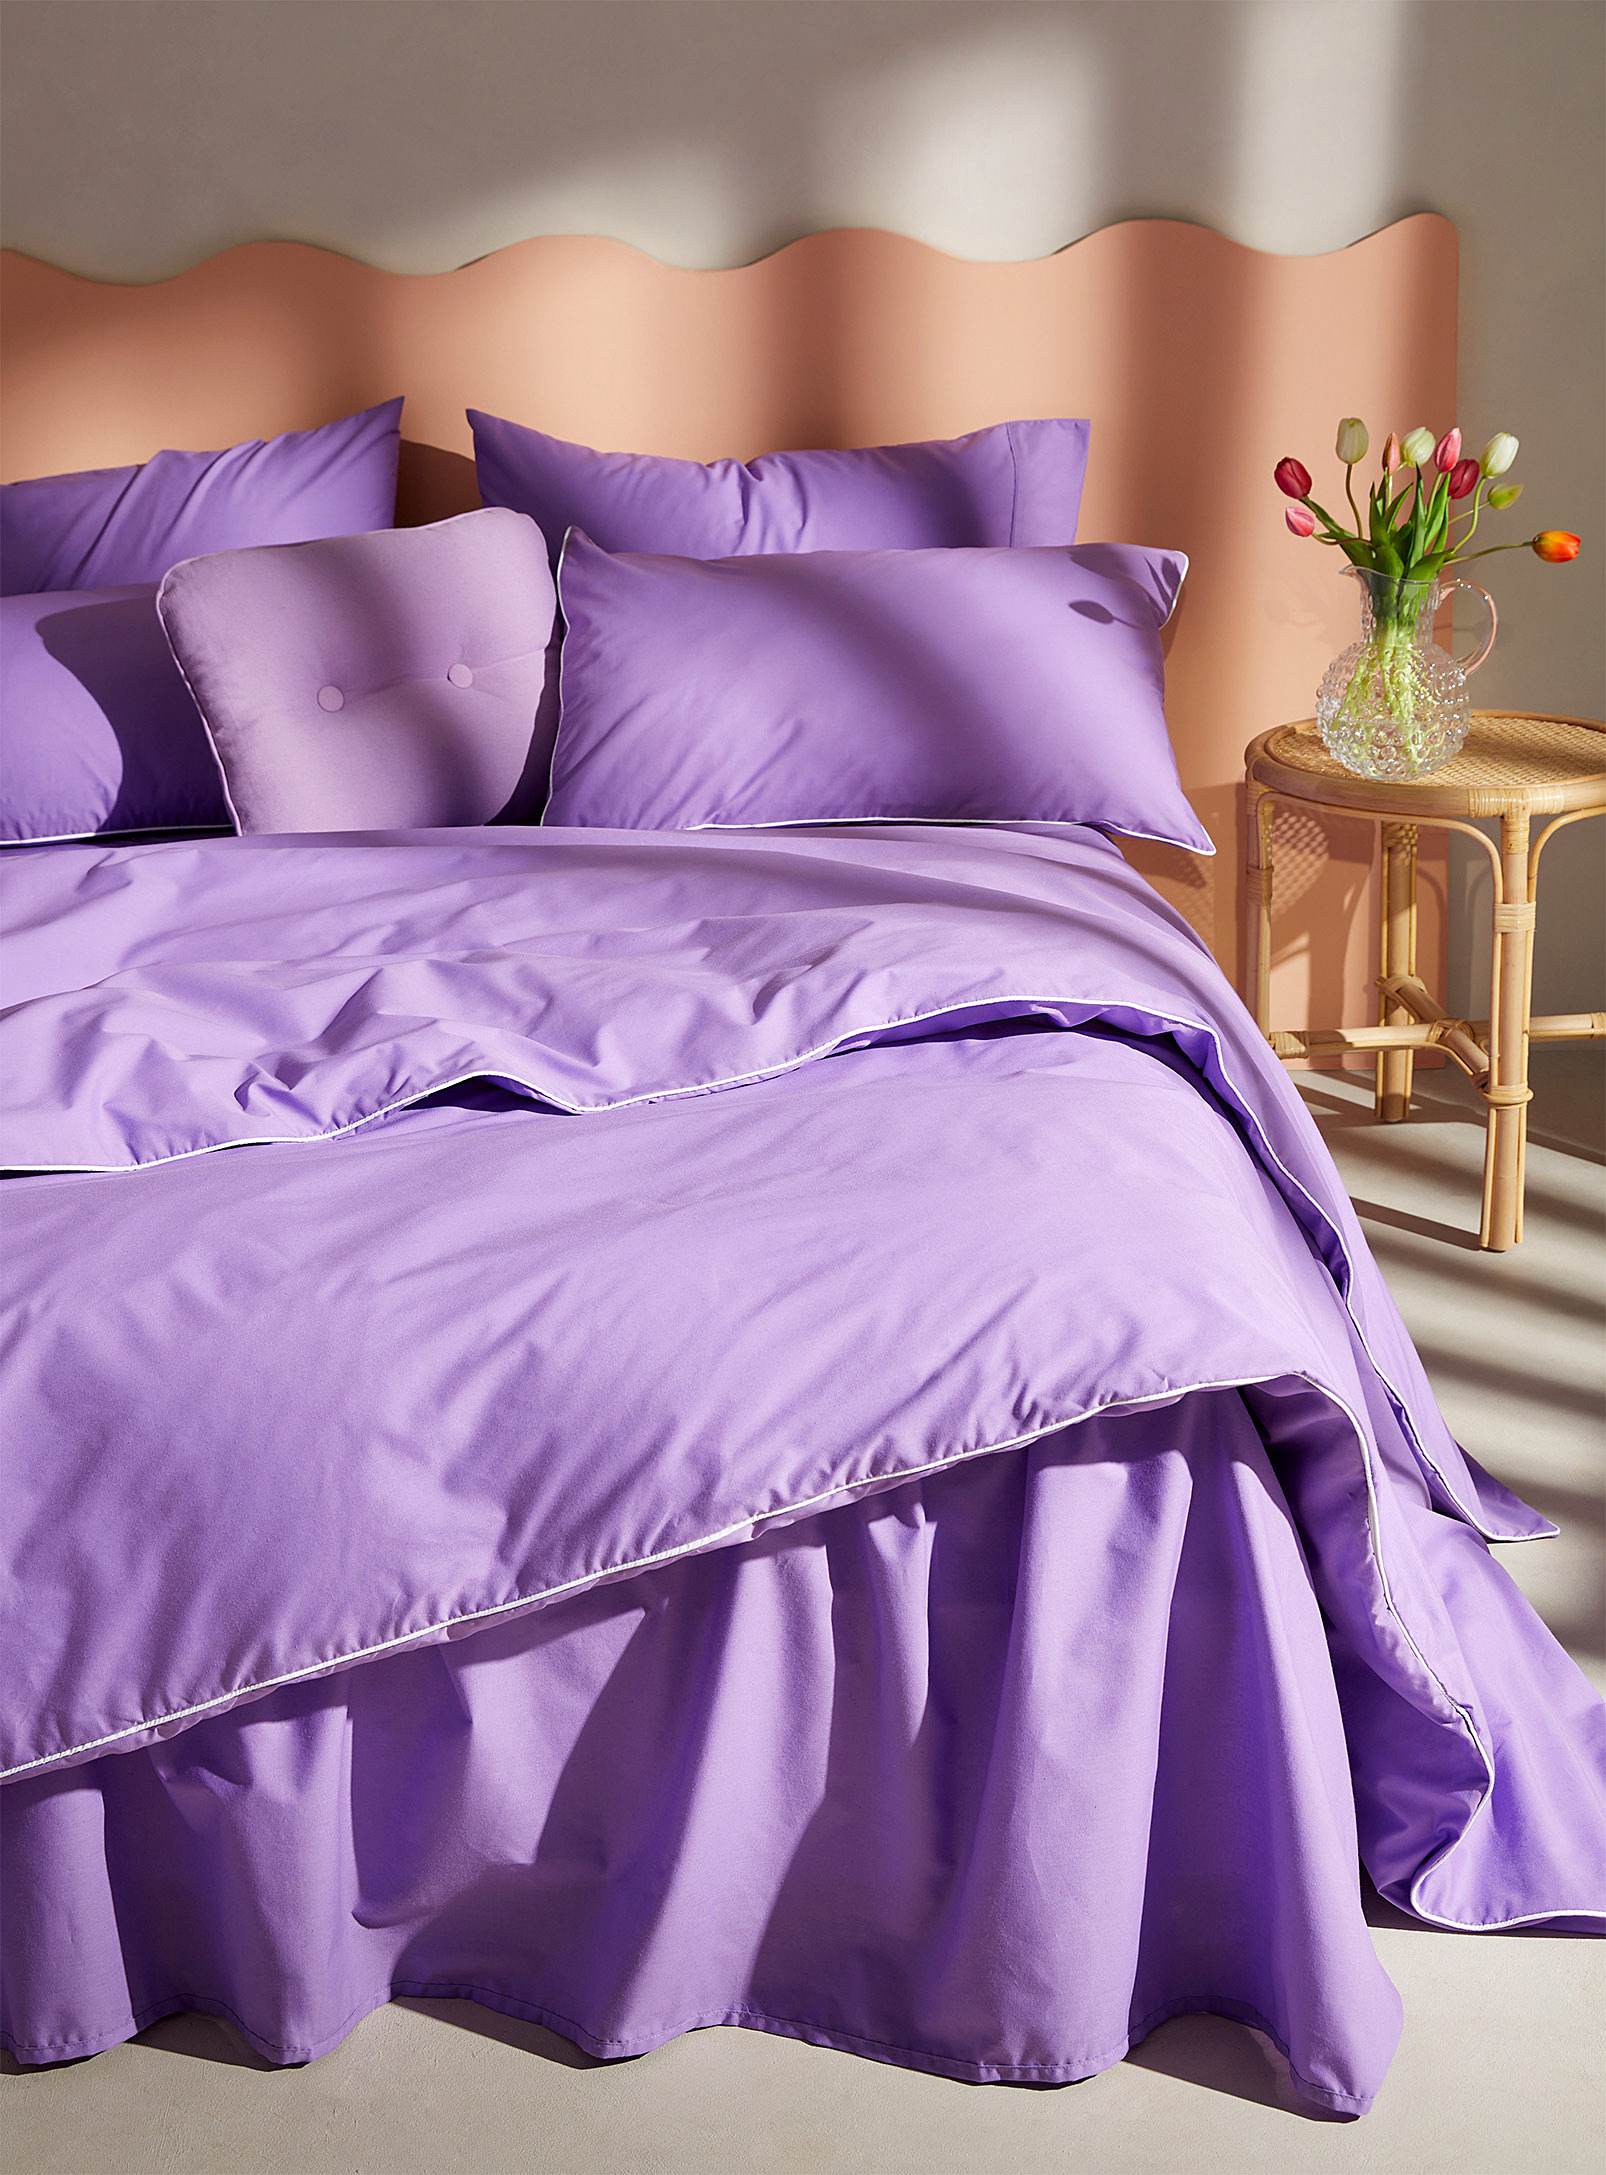 Simons Maison Contrasting Piping Colourful Duvet Cover Set In Lilacs